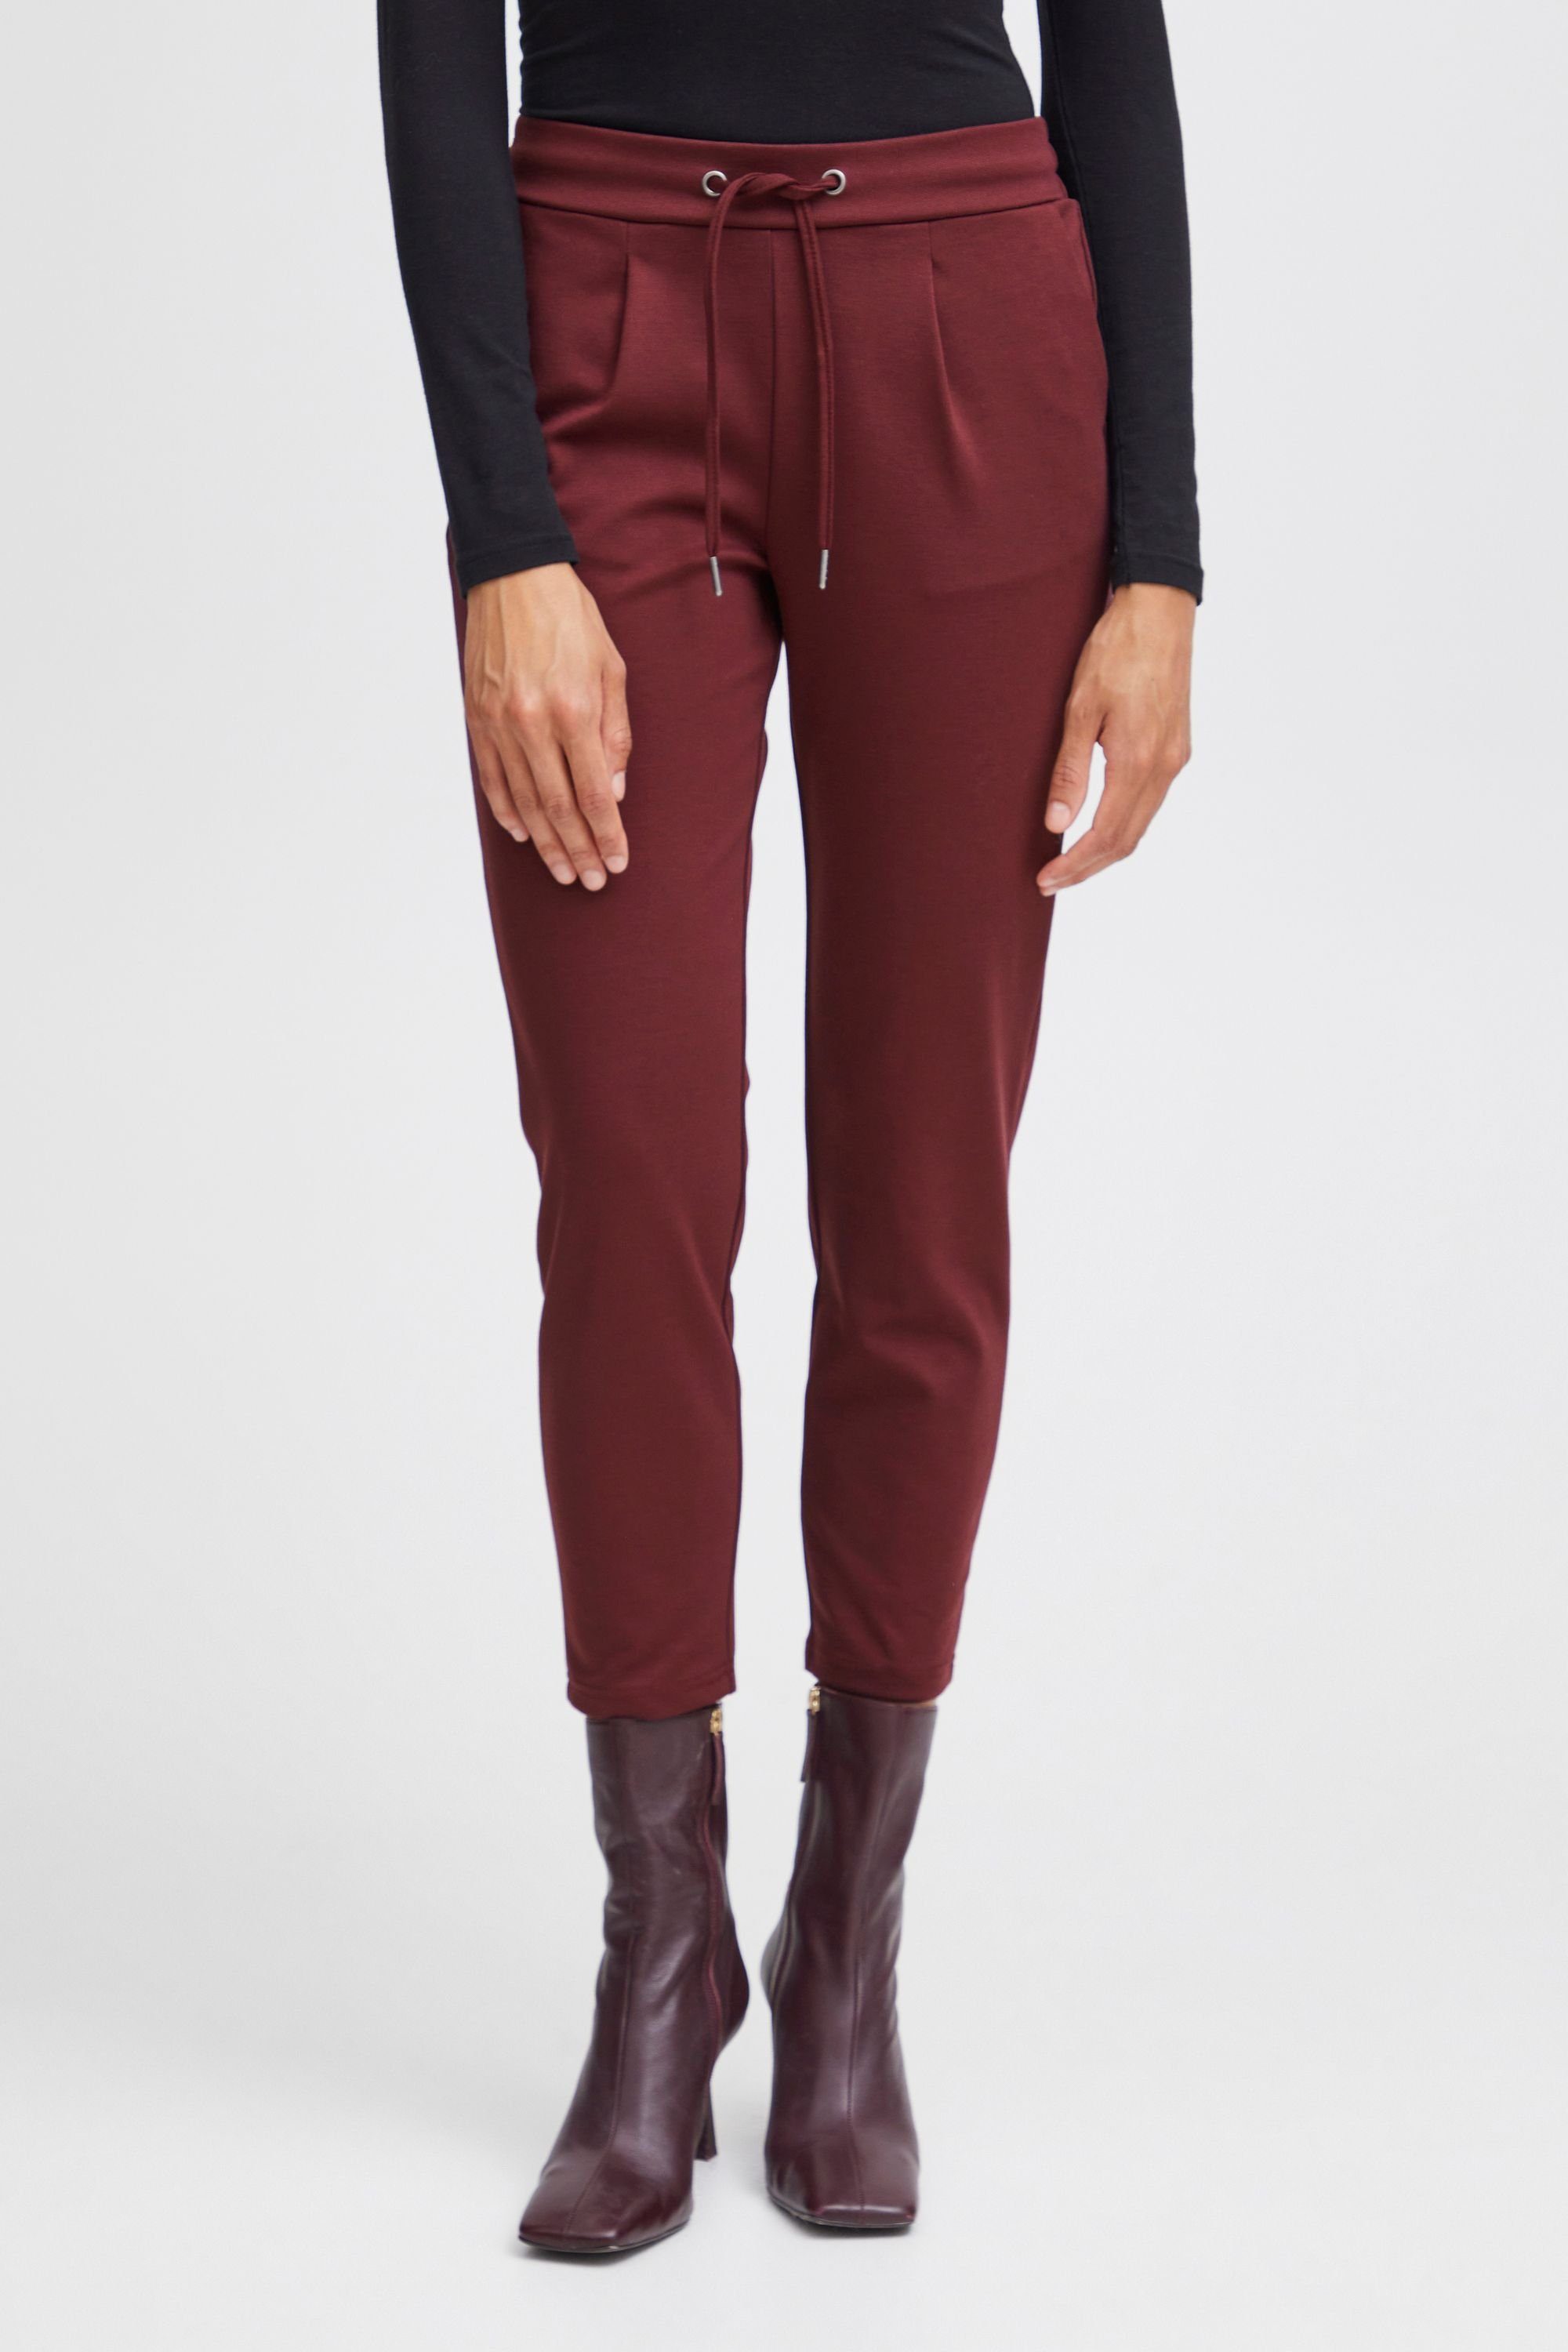 b.young - BYRizetta Royale (191627) 20803903 Port crop Stoffhose pants